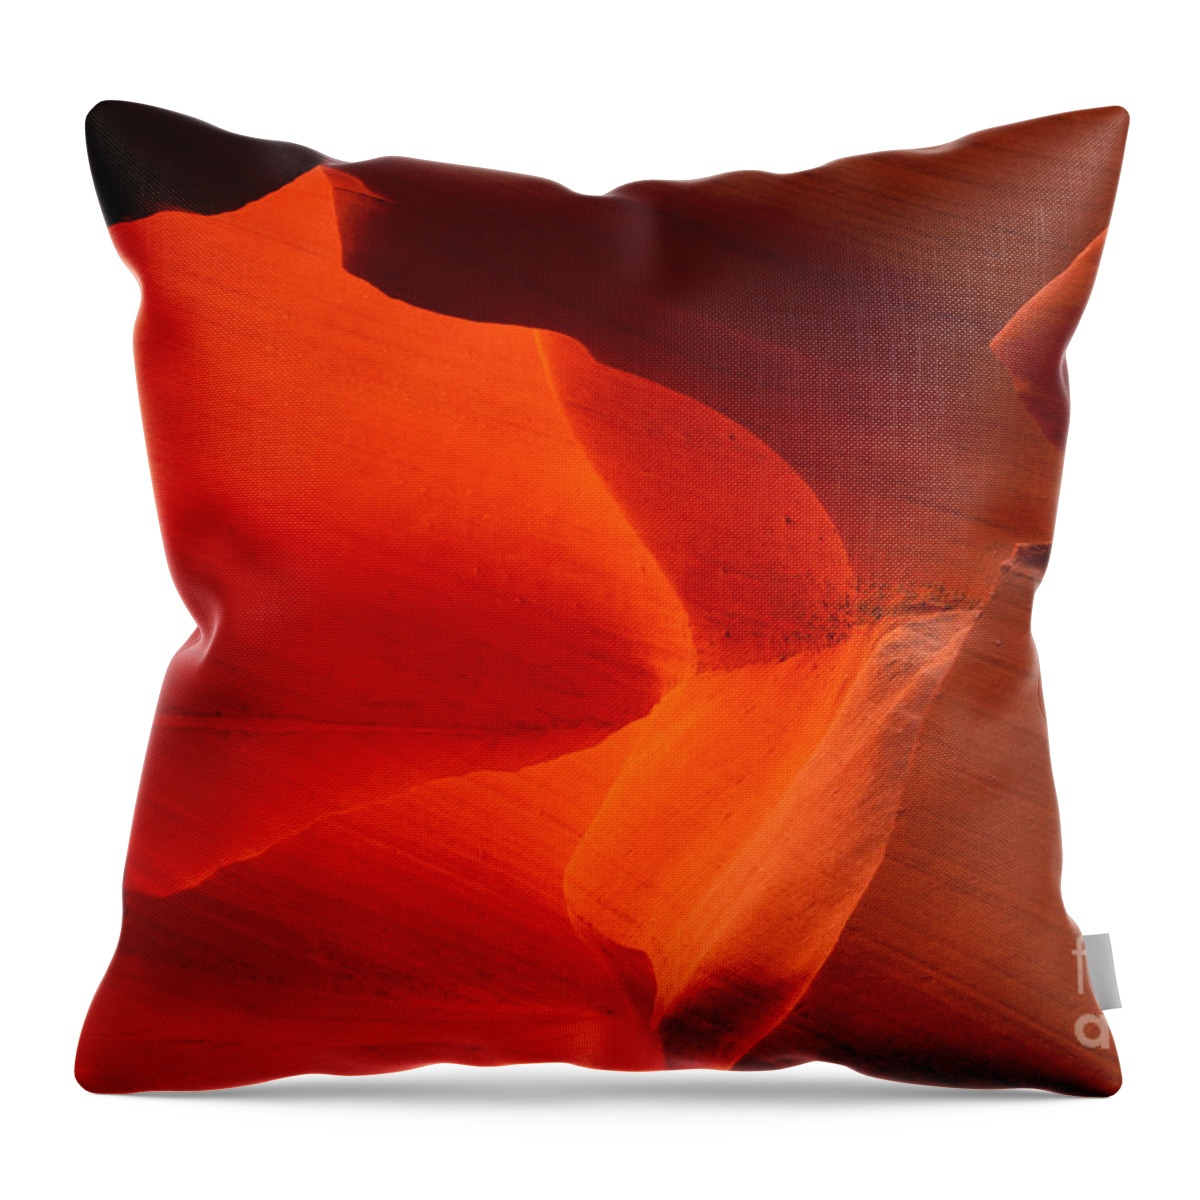 Arizona Throw Pillow featuring the photograph The Fire Within by Bob and Nancy Kendrick